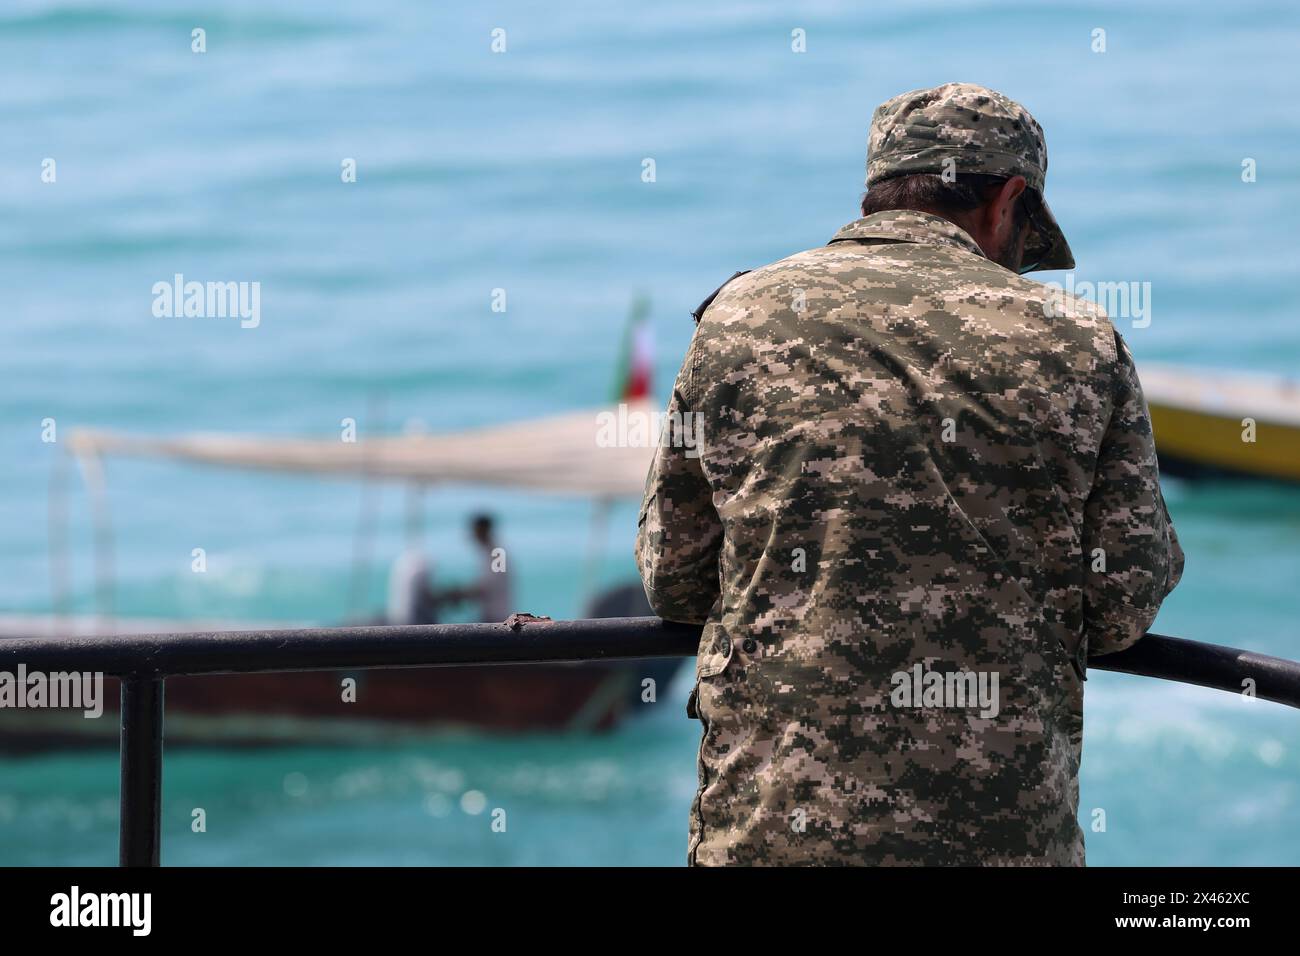 April 29, 2024, Persian Gulf, Bushehr, Iran: A member of The Islamic Revolutionary Guard Corps Navy (IRGCN) monitors the area on board a warship along the Persian Gulf during the IRGC marine parade to commemorate Persian Gulf National Day near the Bushehr nuclear power plant in the seaport city of Bushehr, Bushehr province, southern Iran. Iran celebrates the anniversary of the liberation of the country's south from Portuguese occupation in 1622 as 'Persian Gulf National Day' in Bushehr on April 29, 2024. The date coincides with the anniversary of a successful military campaign by Shah Abbas, t Stock Photo